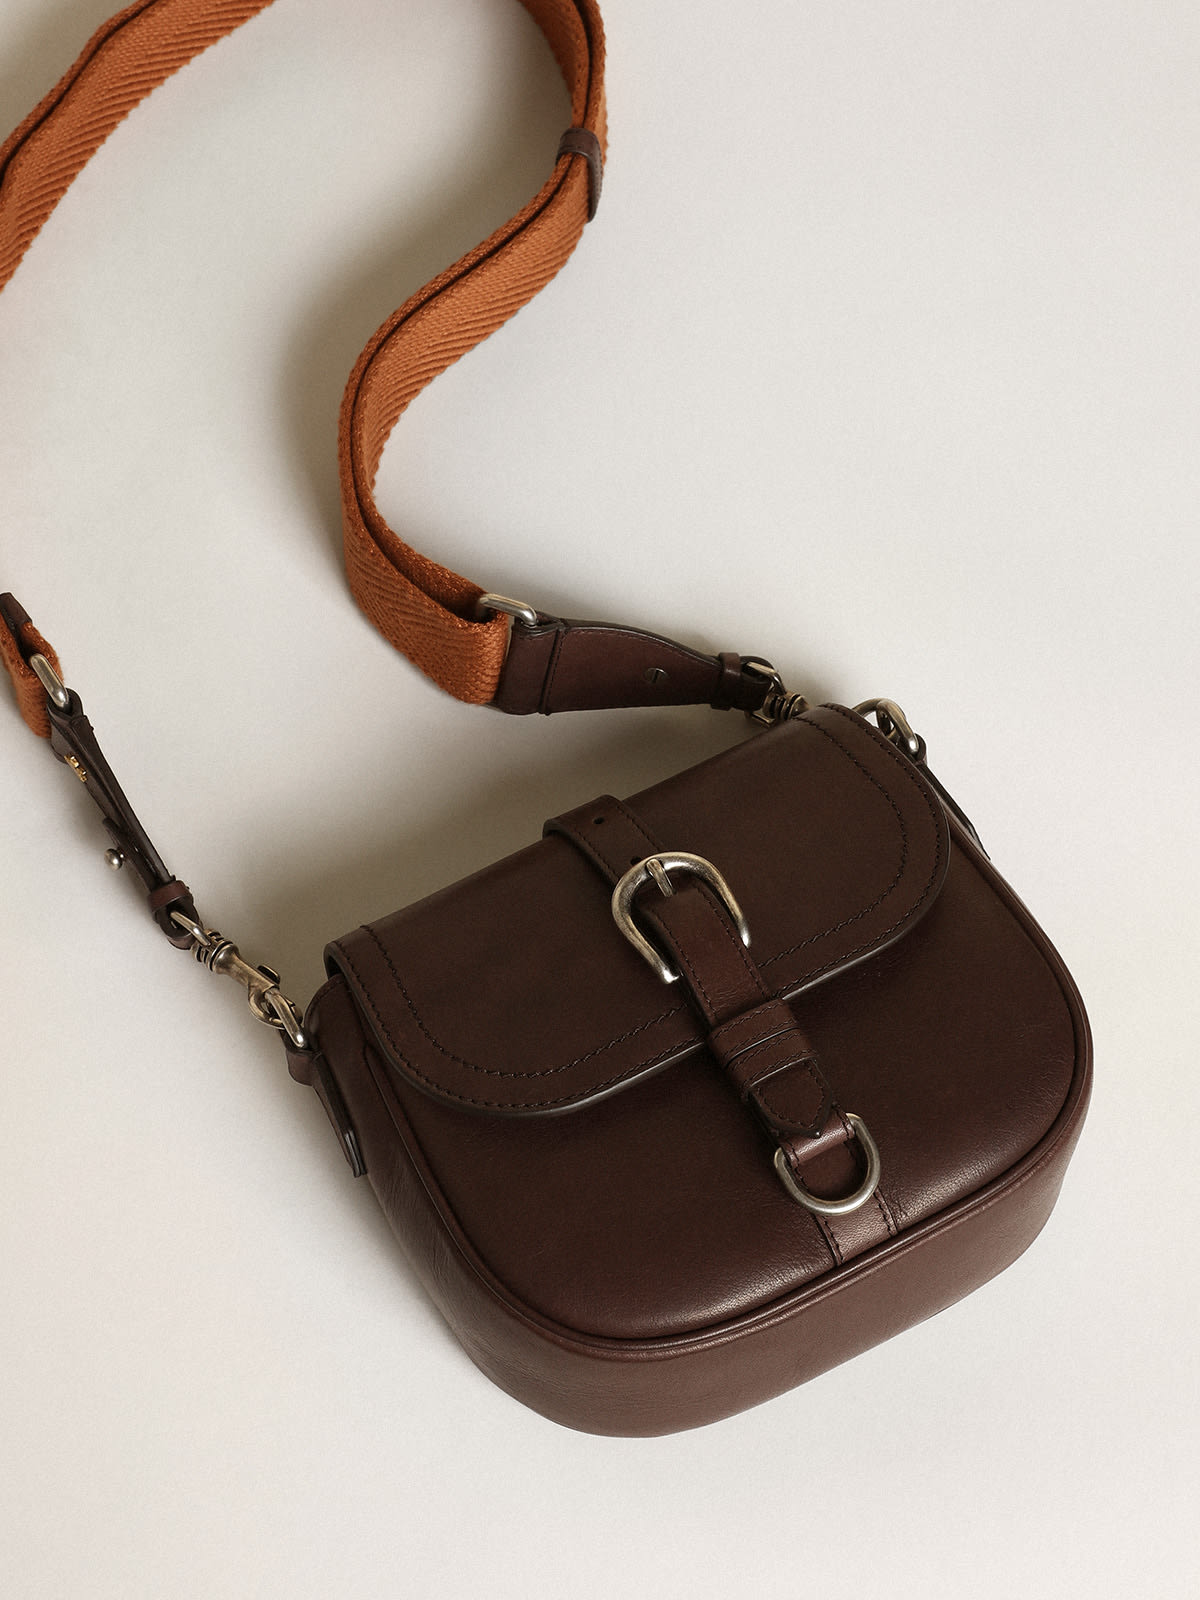 Golden Goose - Small Sally Bag in dark brown leather with contrasting buckle and shoulder strap in 